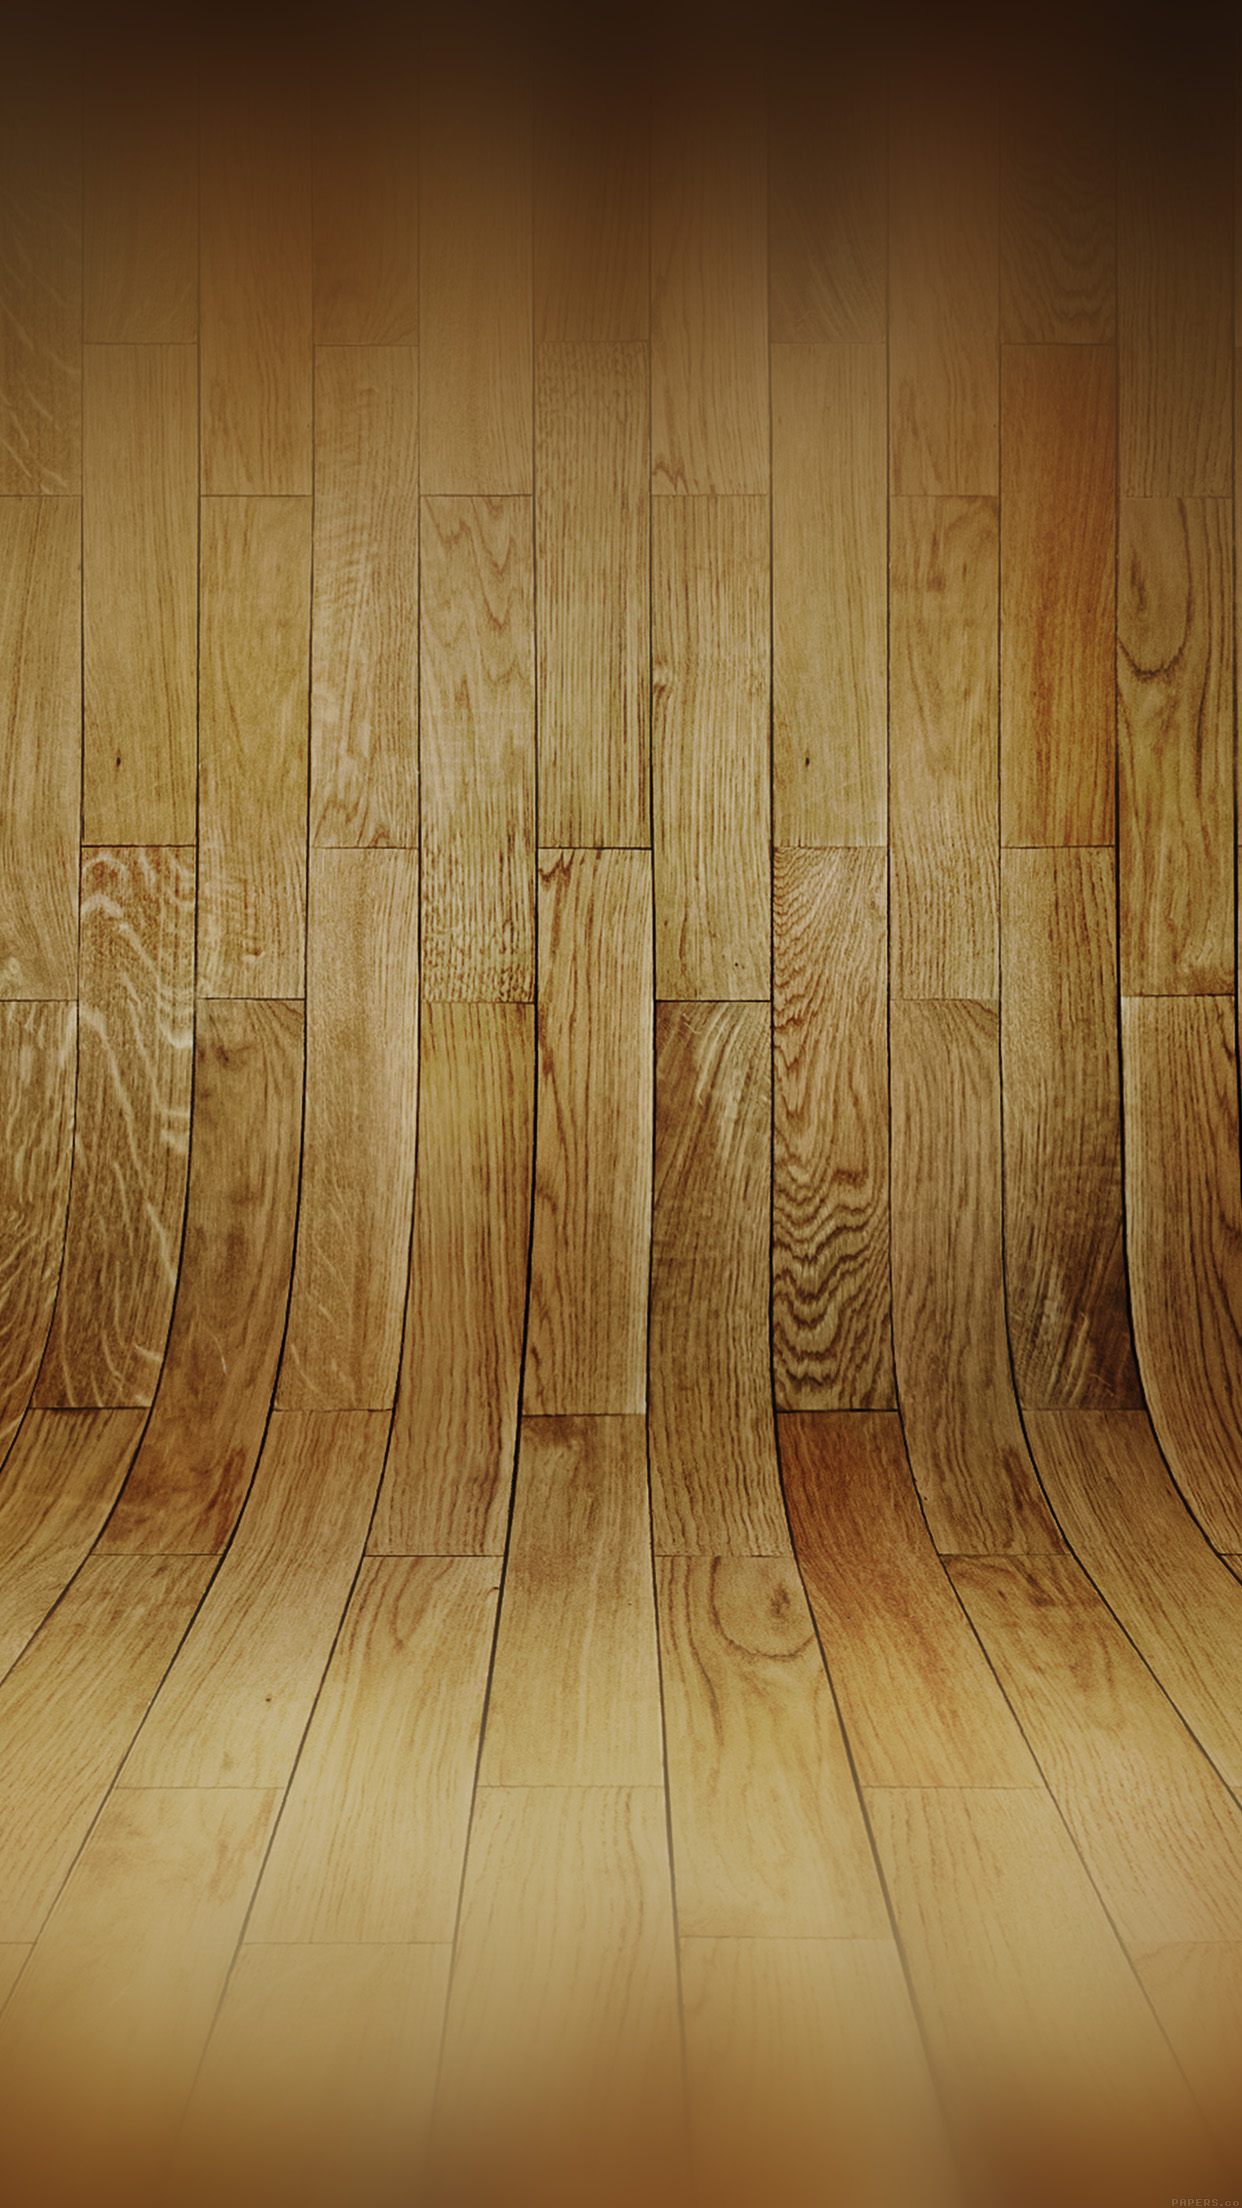 Curved 3D Wood Planks Texture iPhone 6 Plus HD Wallpaper